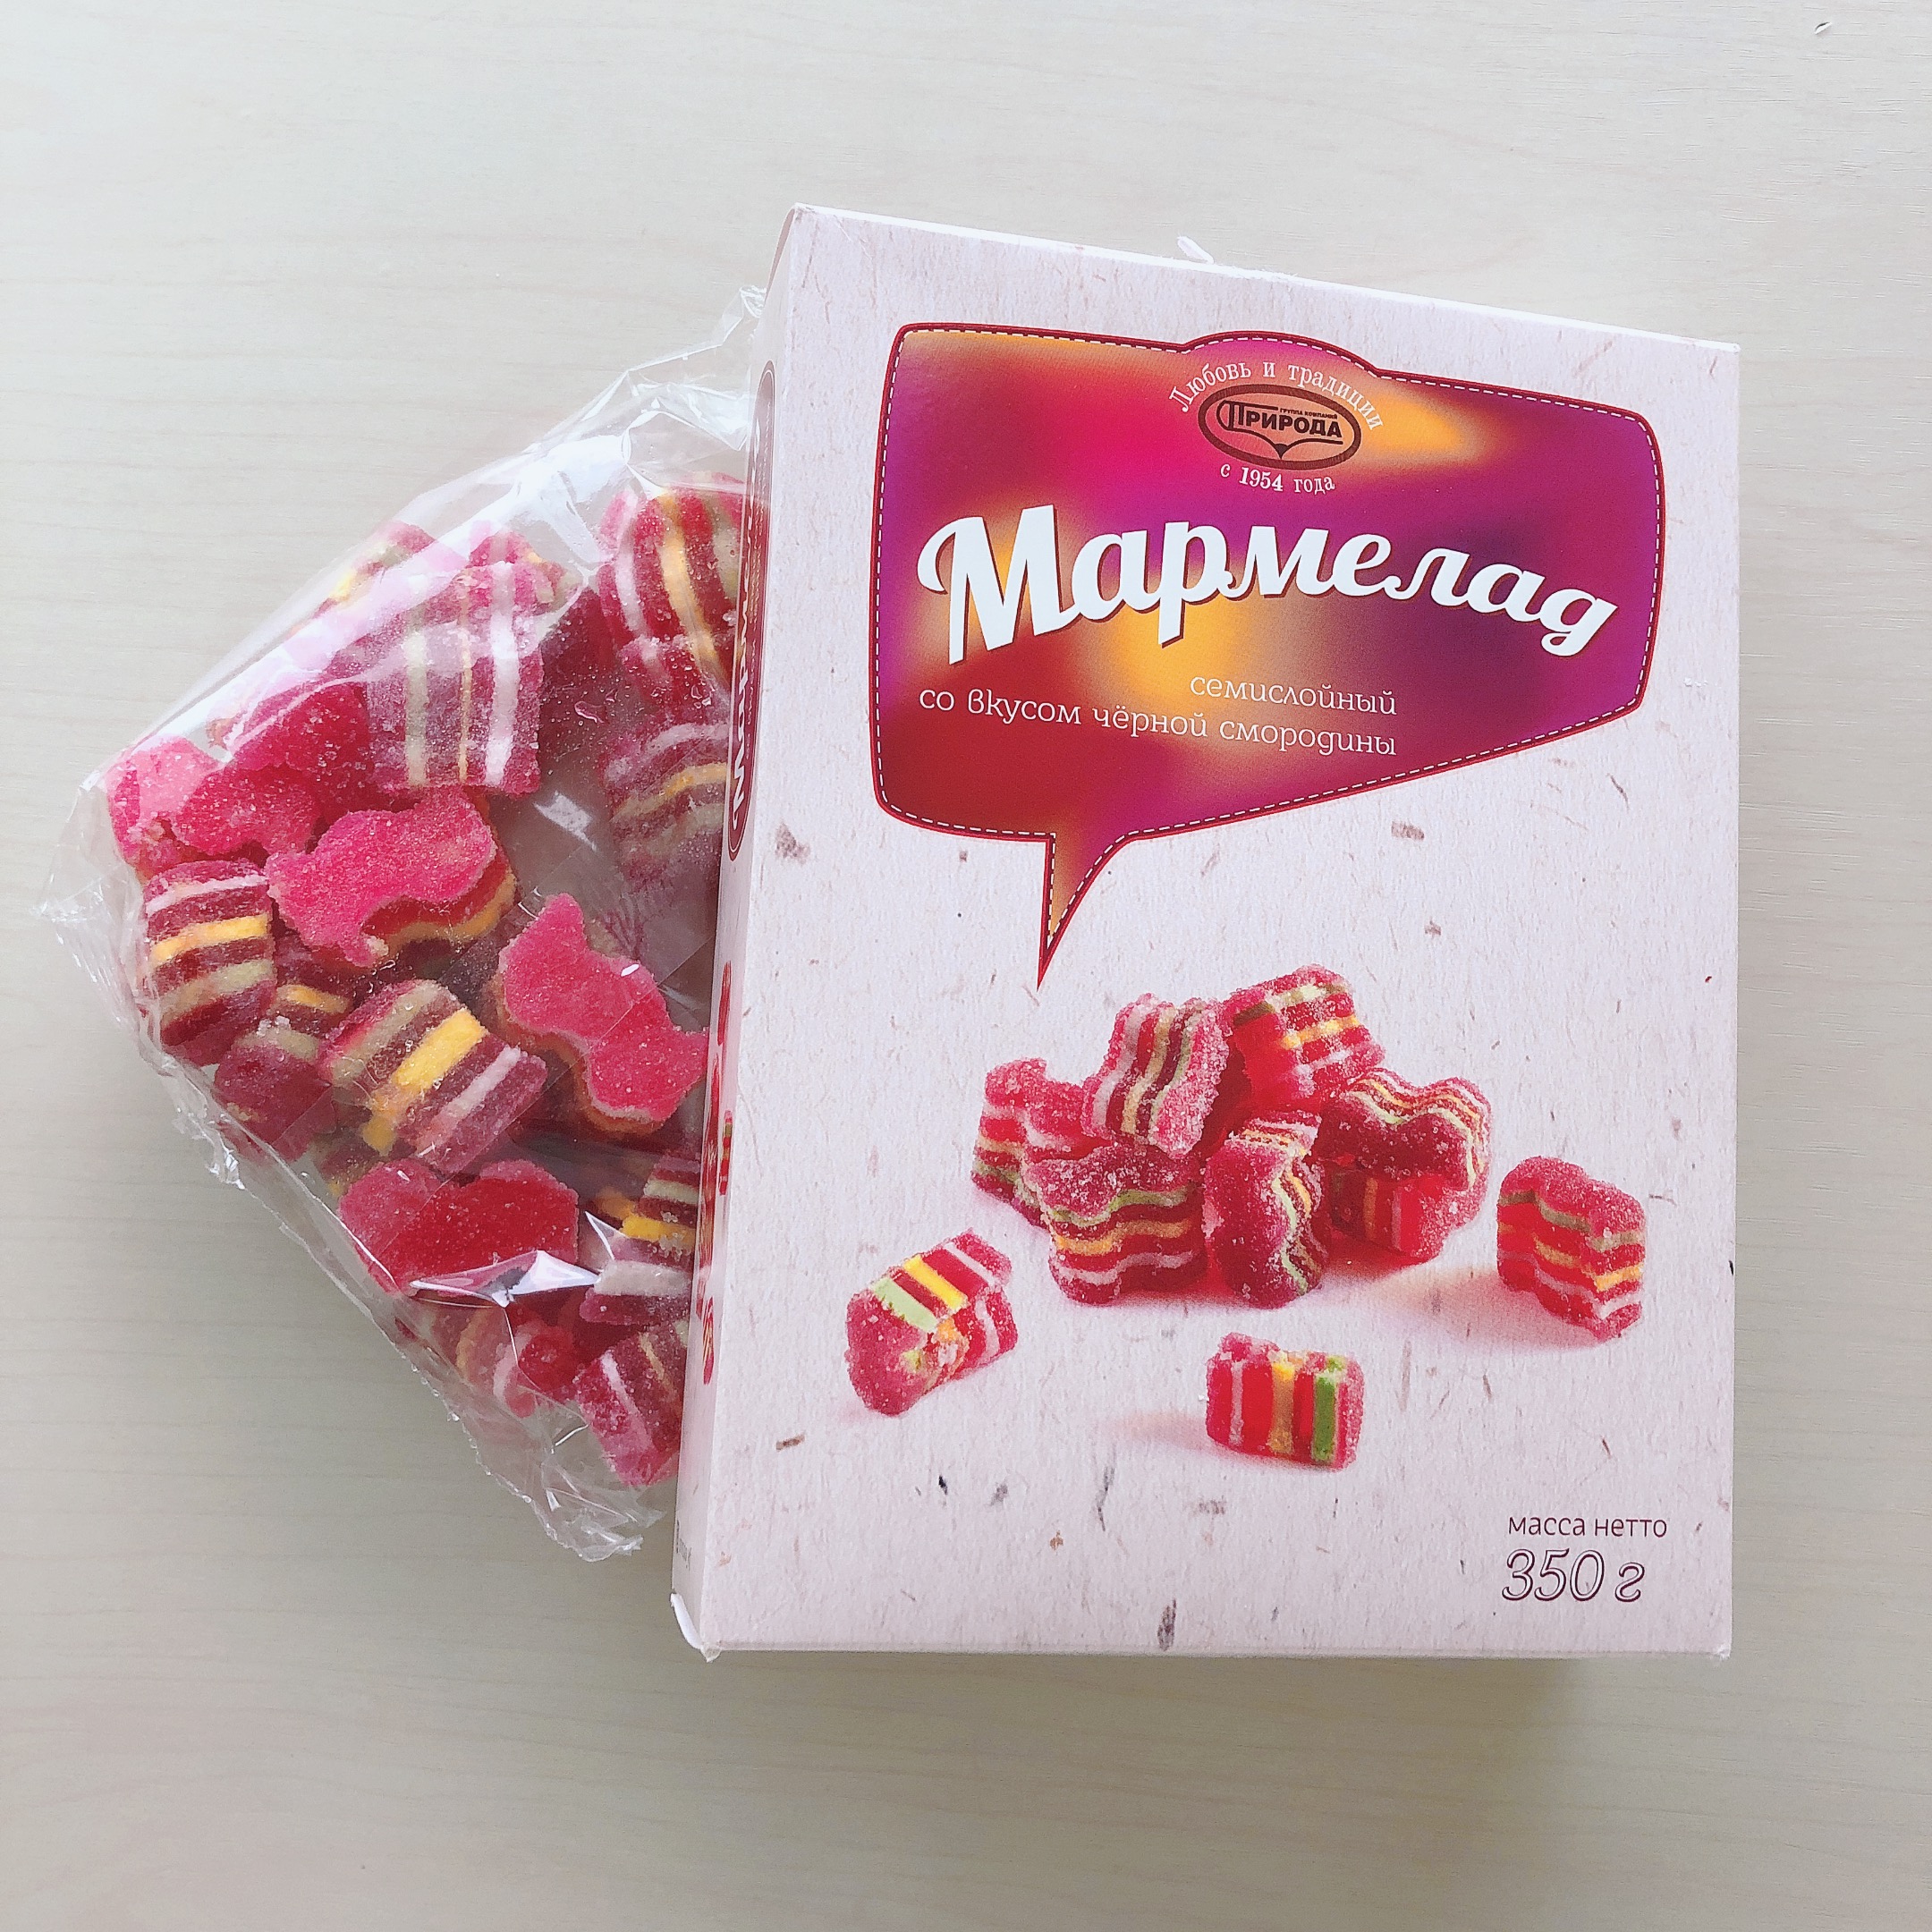 Supplying Russian Jelly Candy With black Currant Flavor